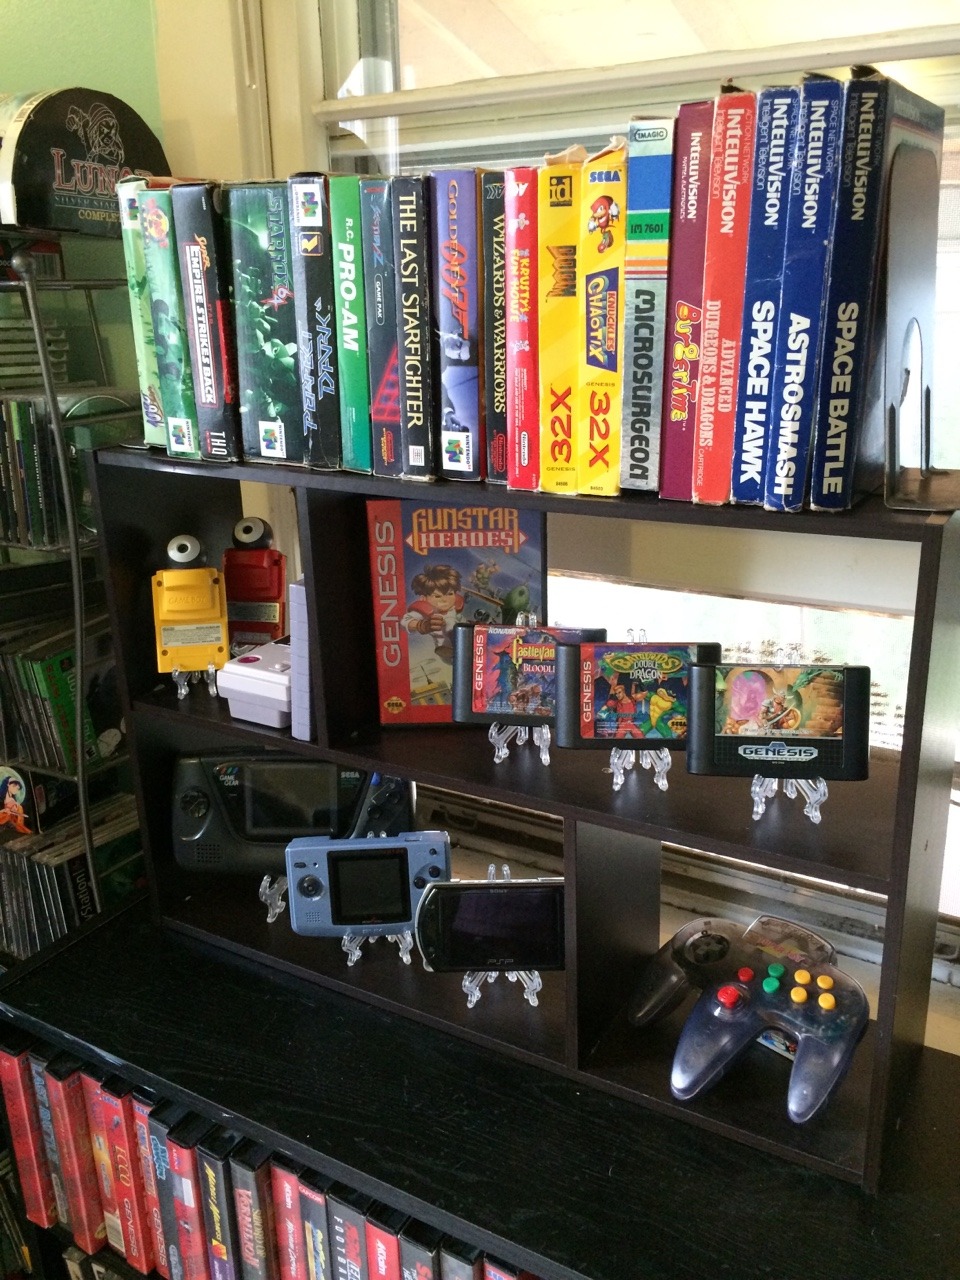 8bitrevolver:  Retro Game Room Version 2 I needed to patch the walls and paint, so